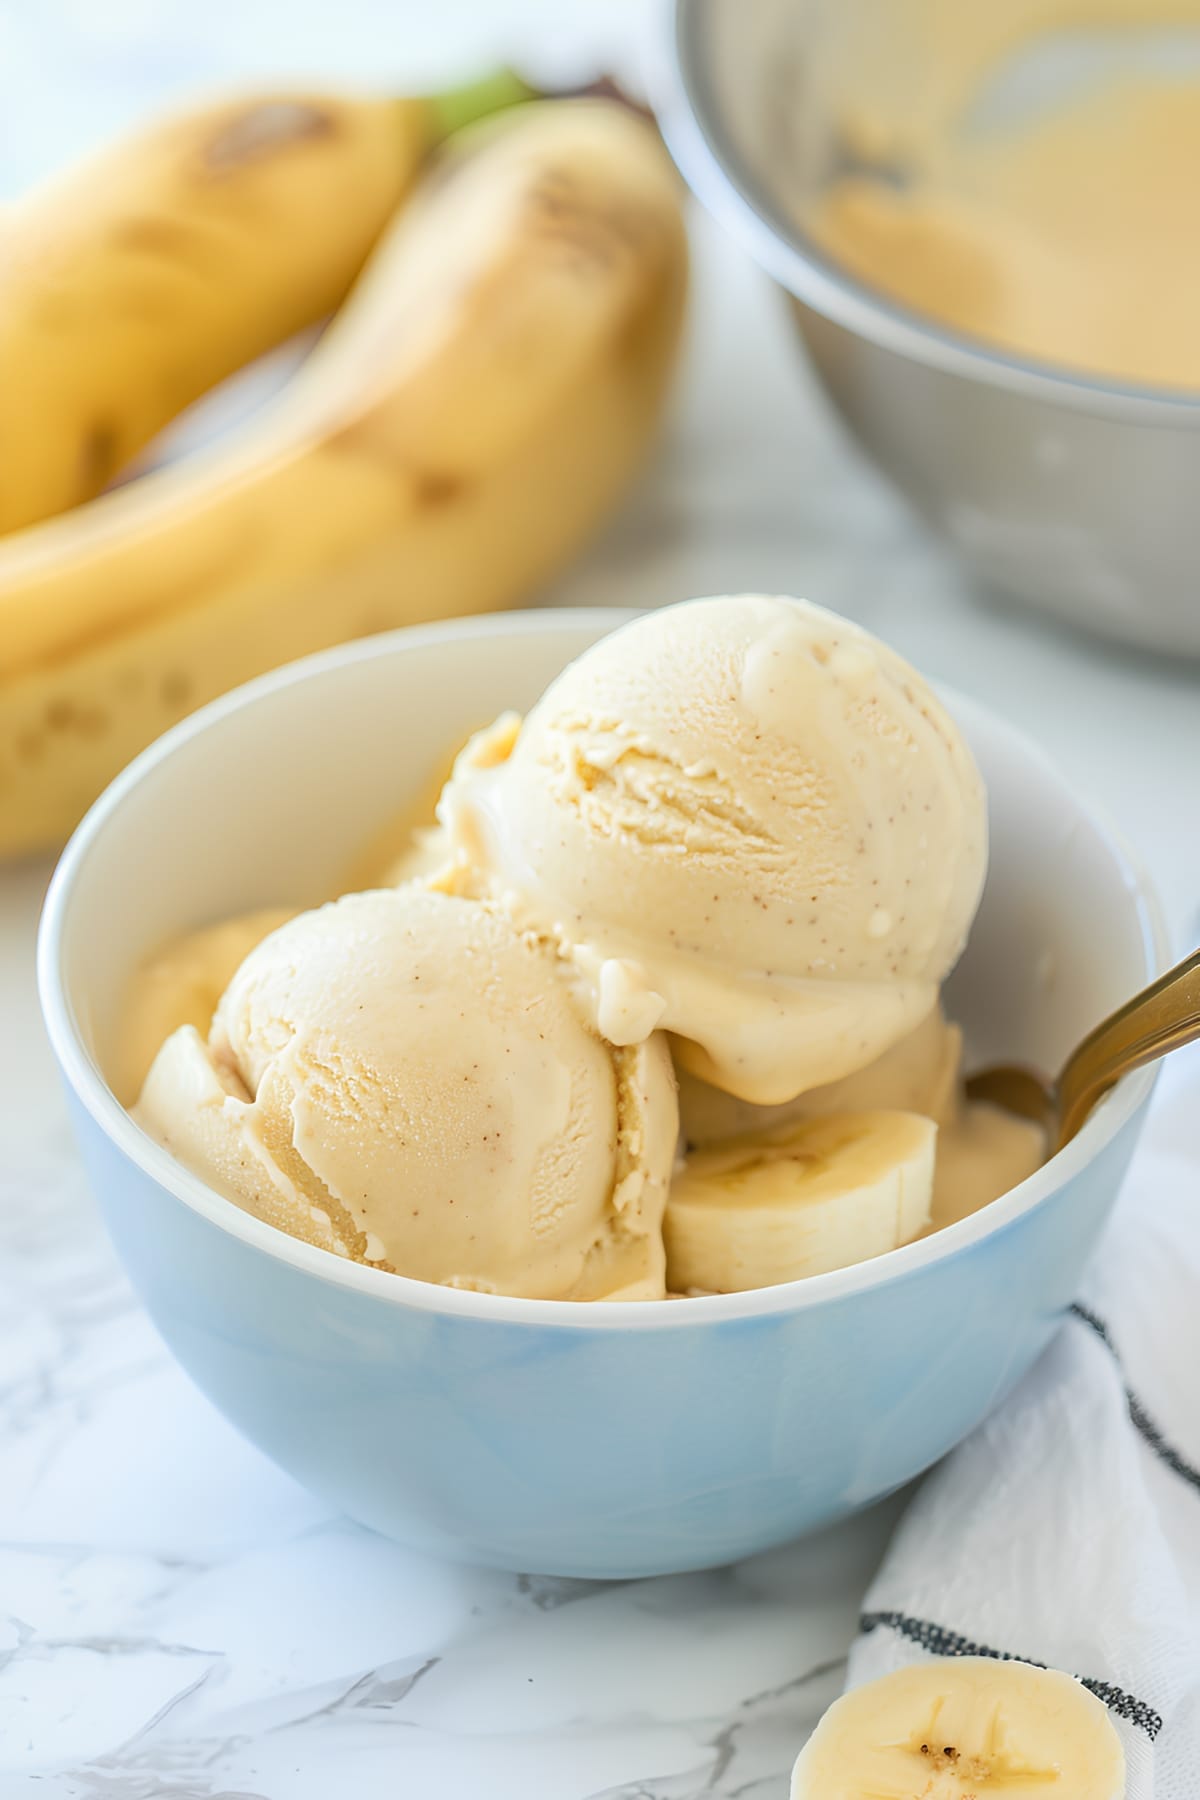 Homemade cold and creamy banana ice cream in a blue bowl